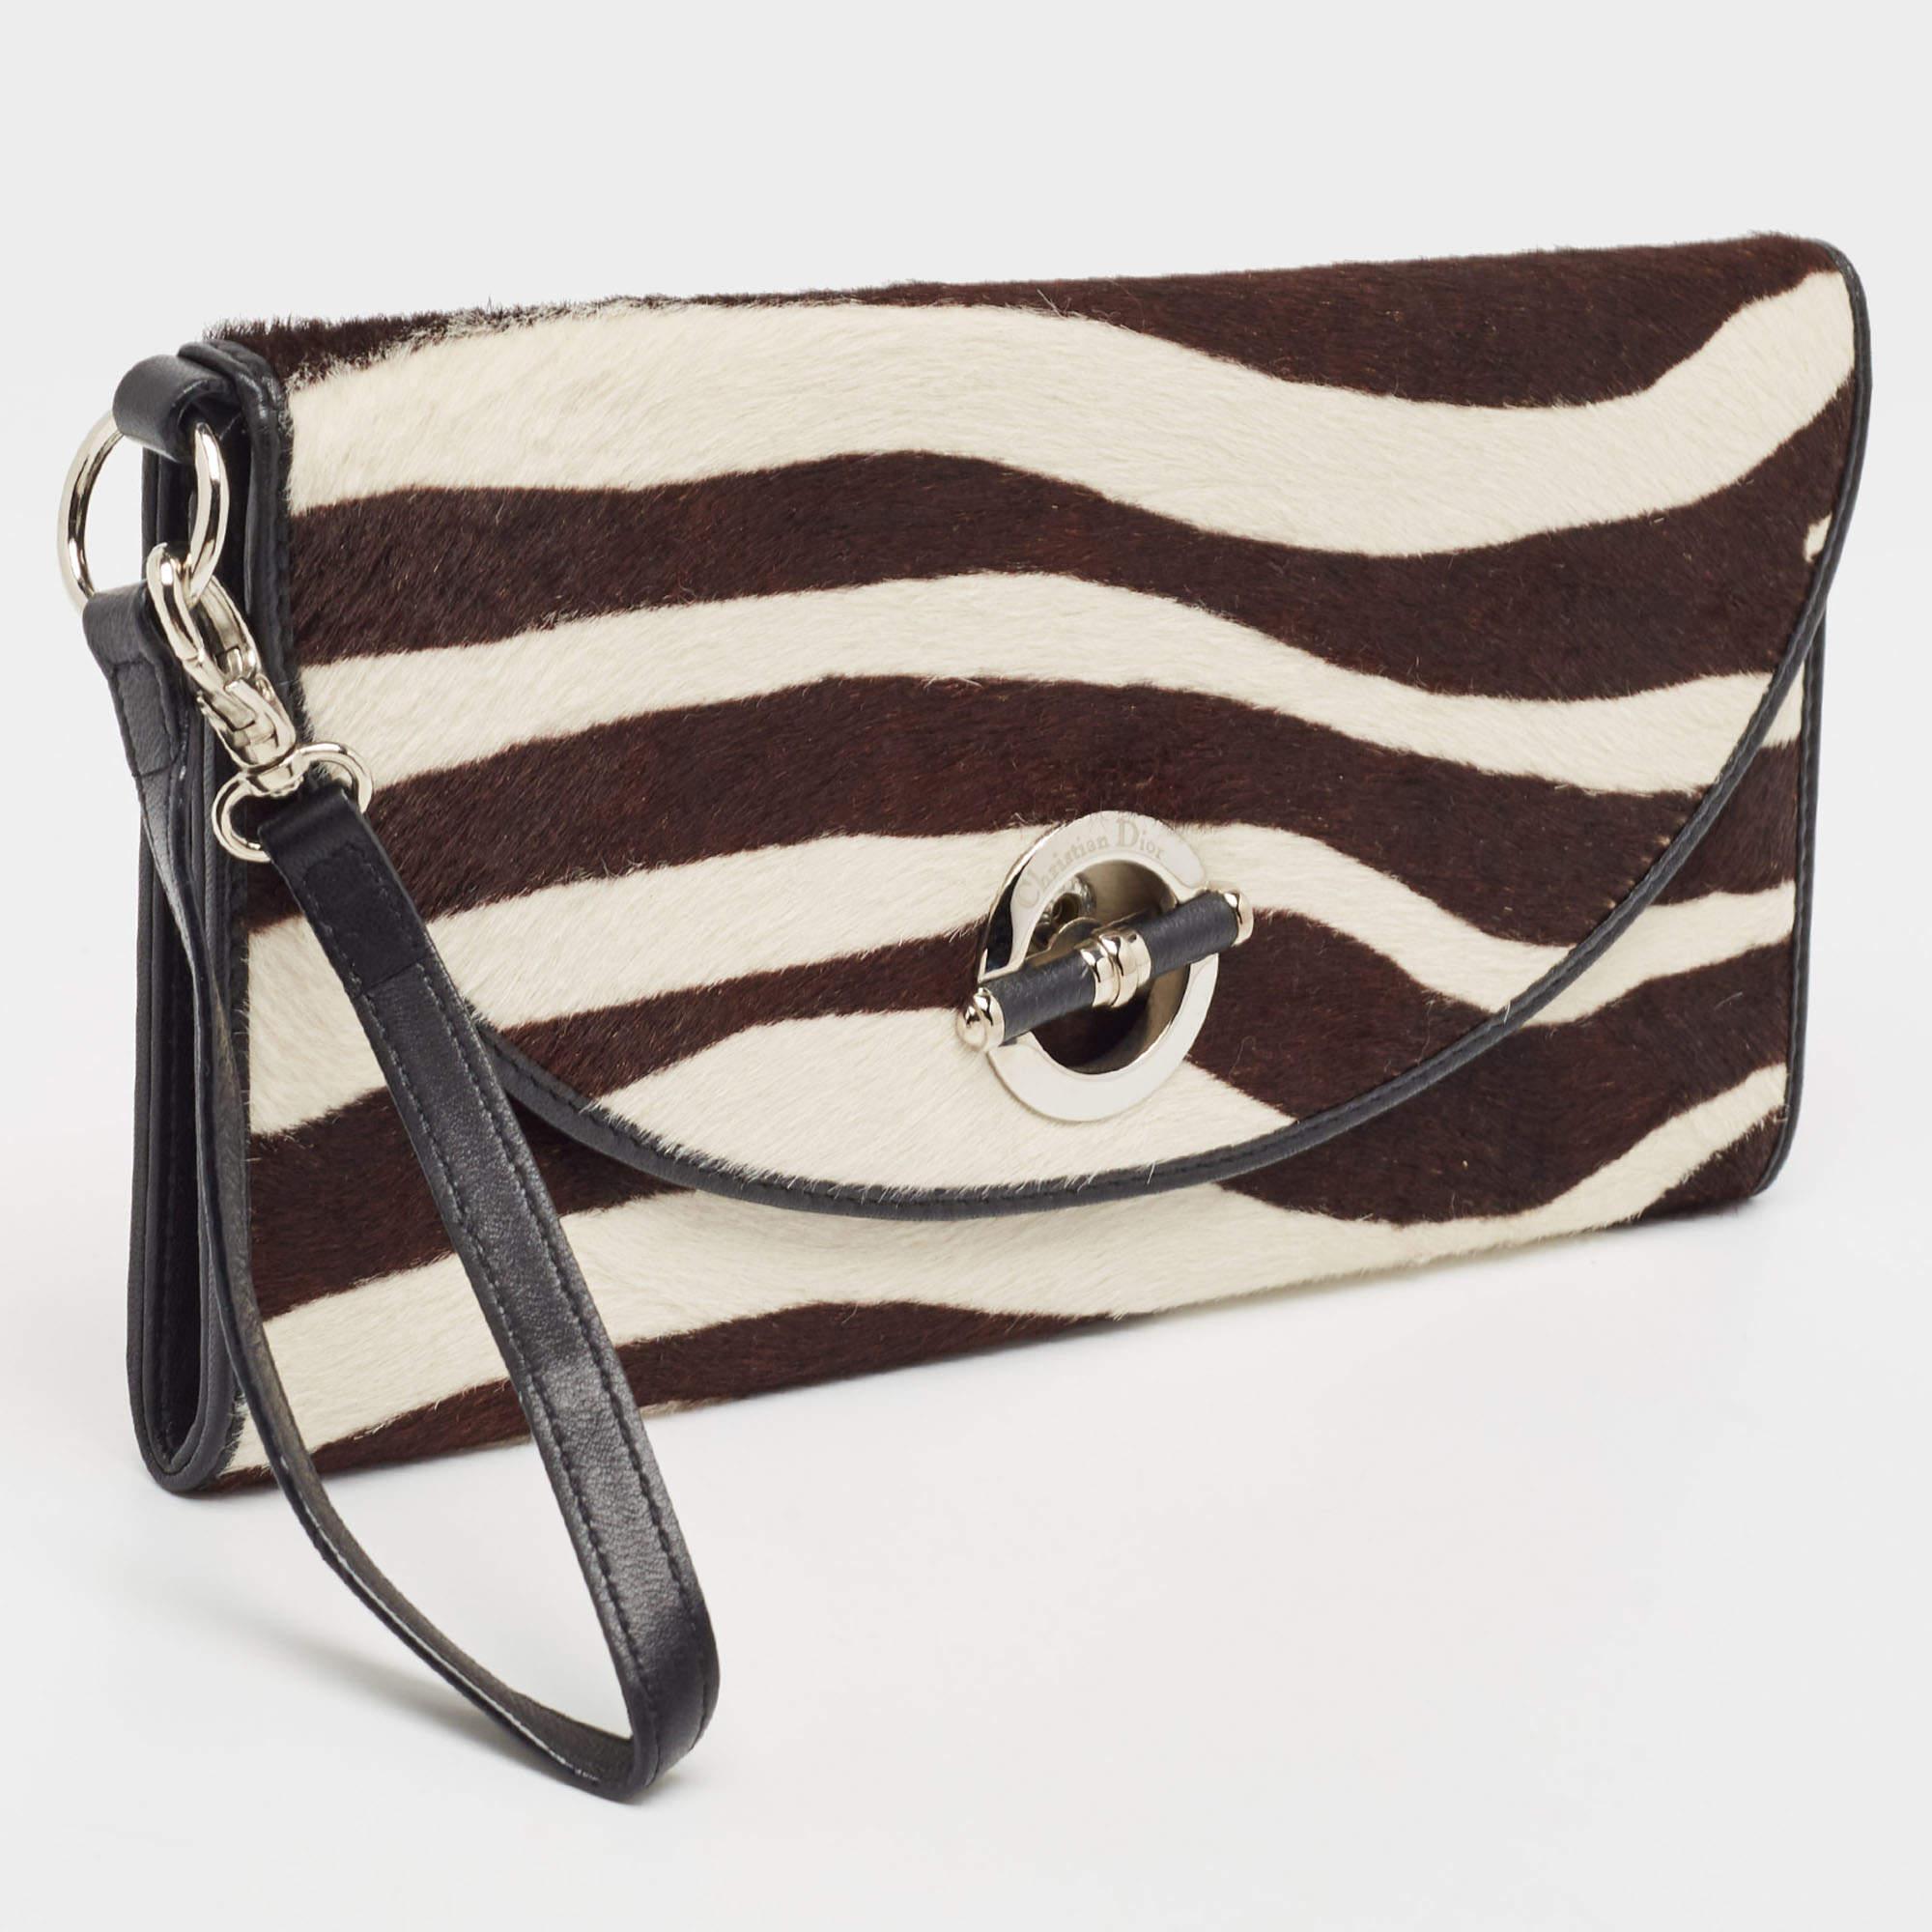 Dior Black/White Calf Hair and Leather Jazz Wristlet Clutch In Excellent Condition For Sale In Dubai, Al Qouz 2